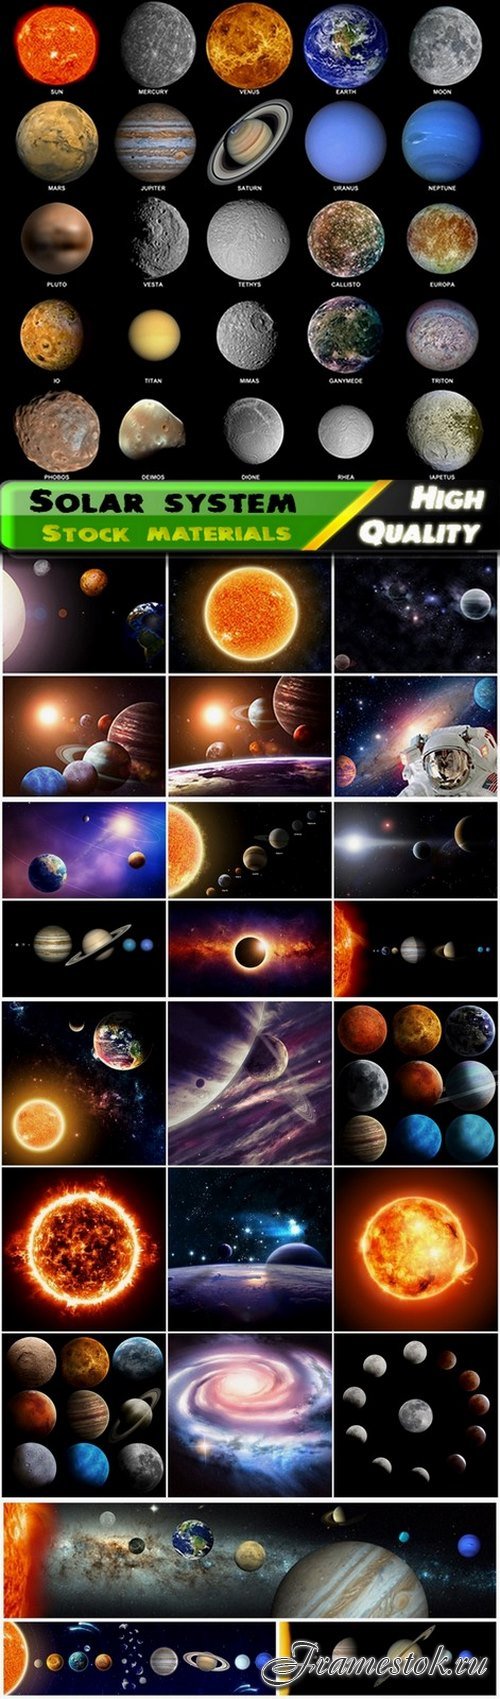 Solar system and the Milky Way - 25 HQ Jpg